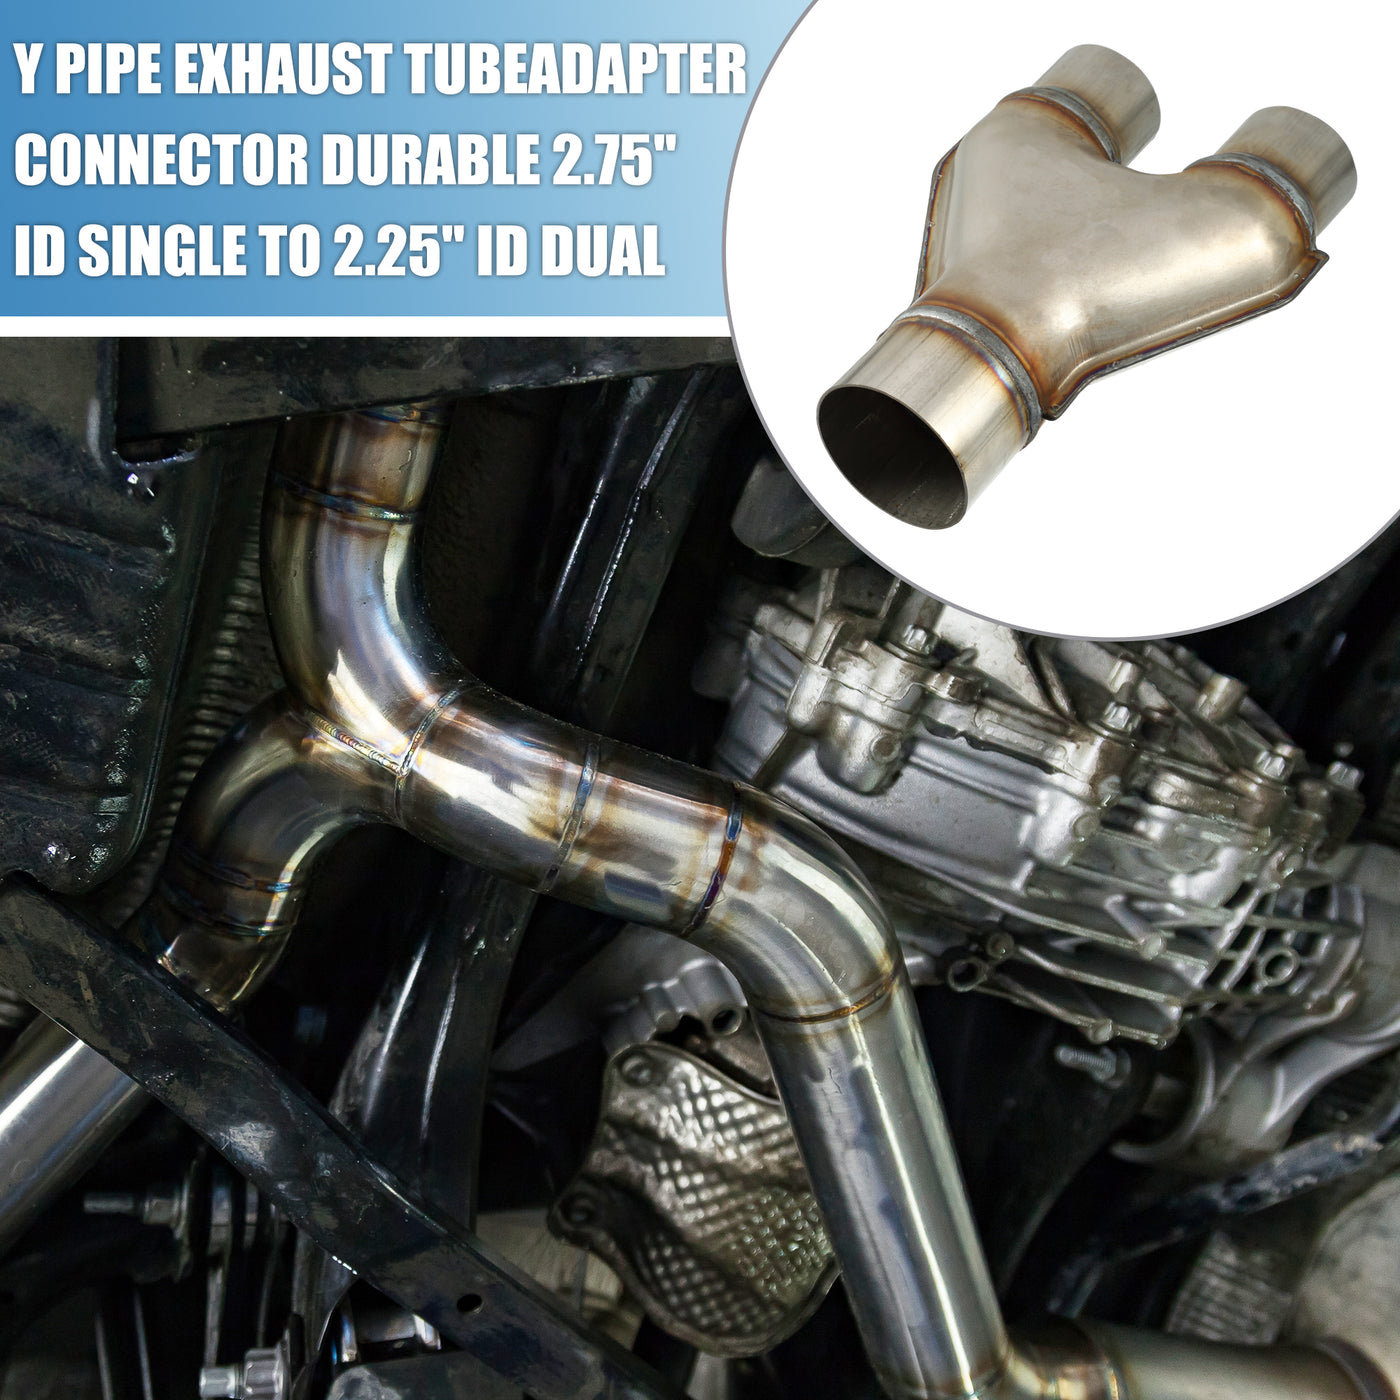 A ABSOPRO Y Pipe Exhaust Tube Adapter Connector Durable 2.75" ID Single to 2.25" ID Dual Exhaust Adapter Connector 10 Inch Overall Length T409 Stainless Steel Silver Tone